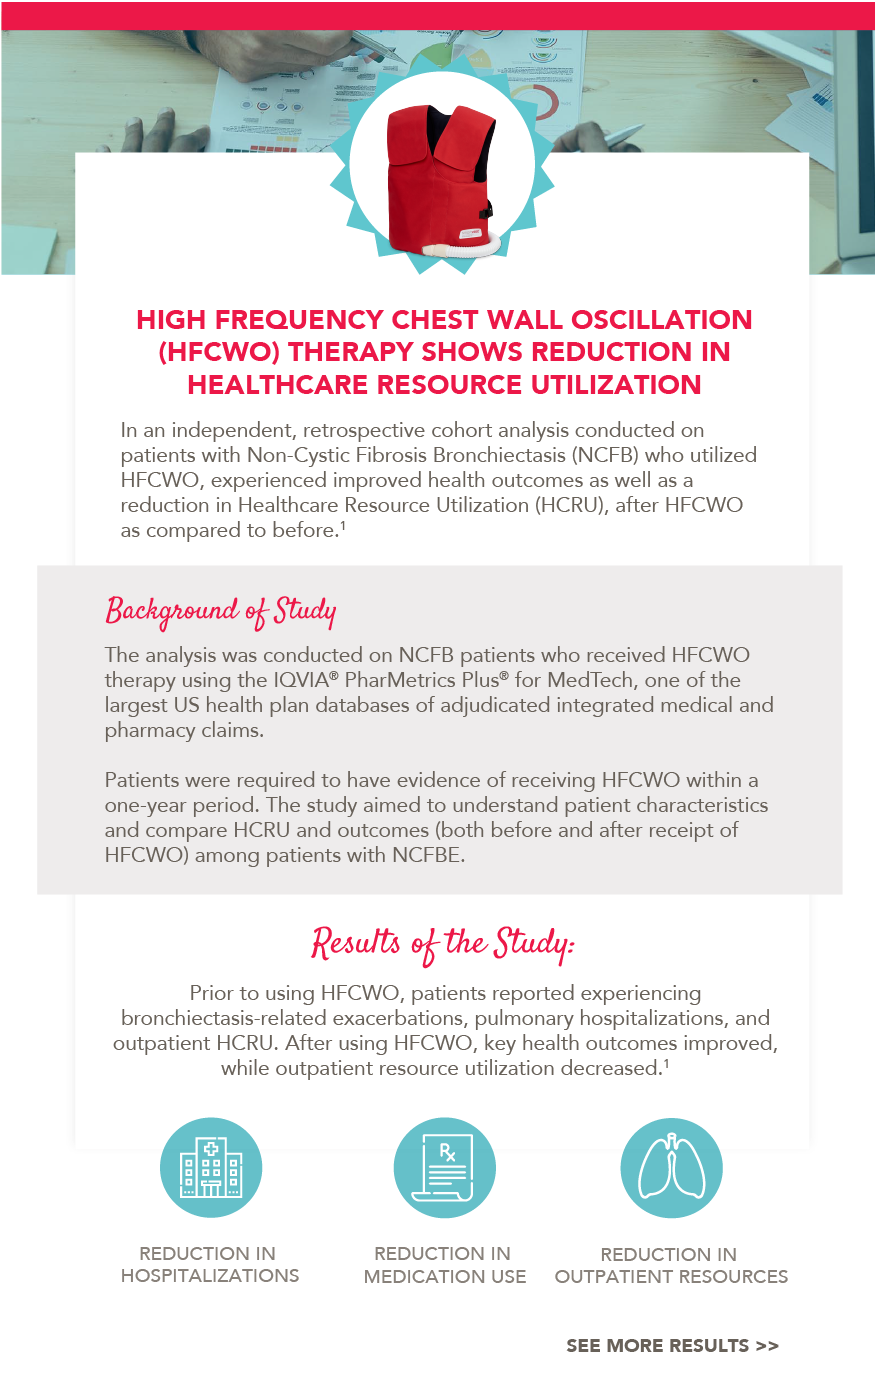 HFCWO therapy shows reduction in healthcare resource utilization